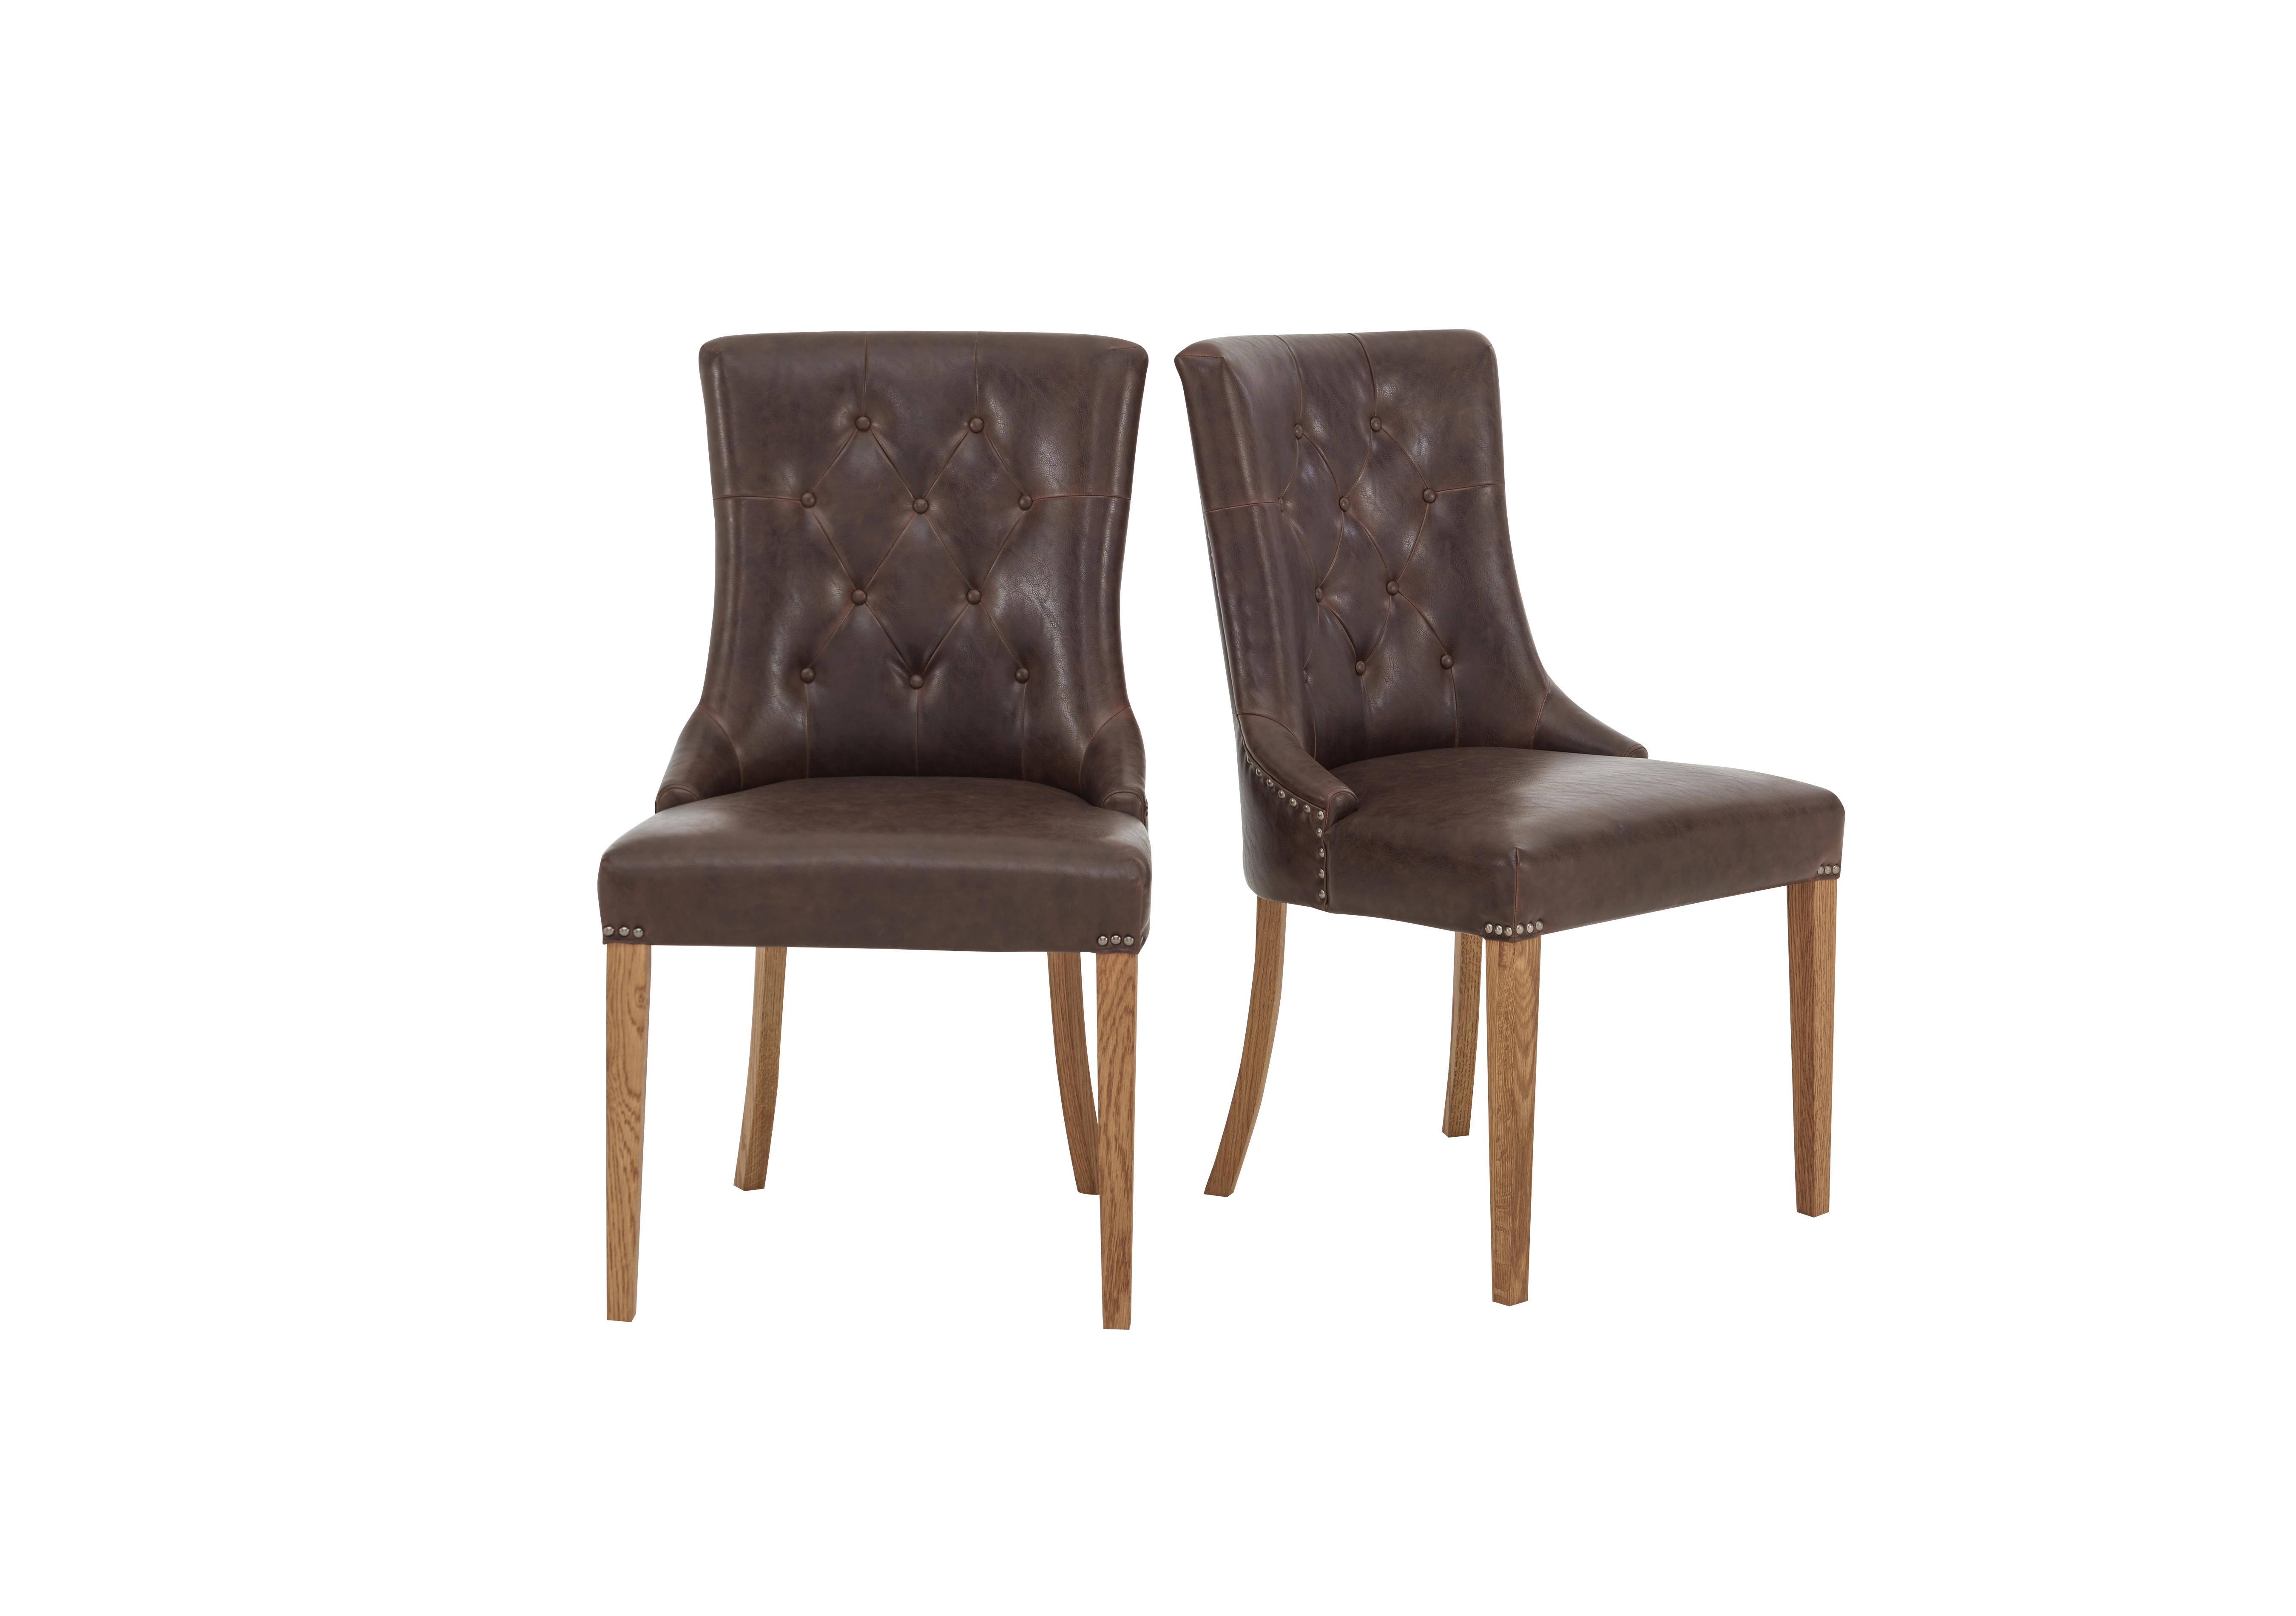 Pattern Pair of Scoop Dining Chairs in Oak Legs / Espresso Faux Lthr on Furniture Village